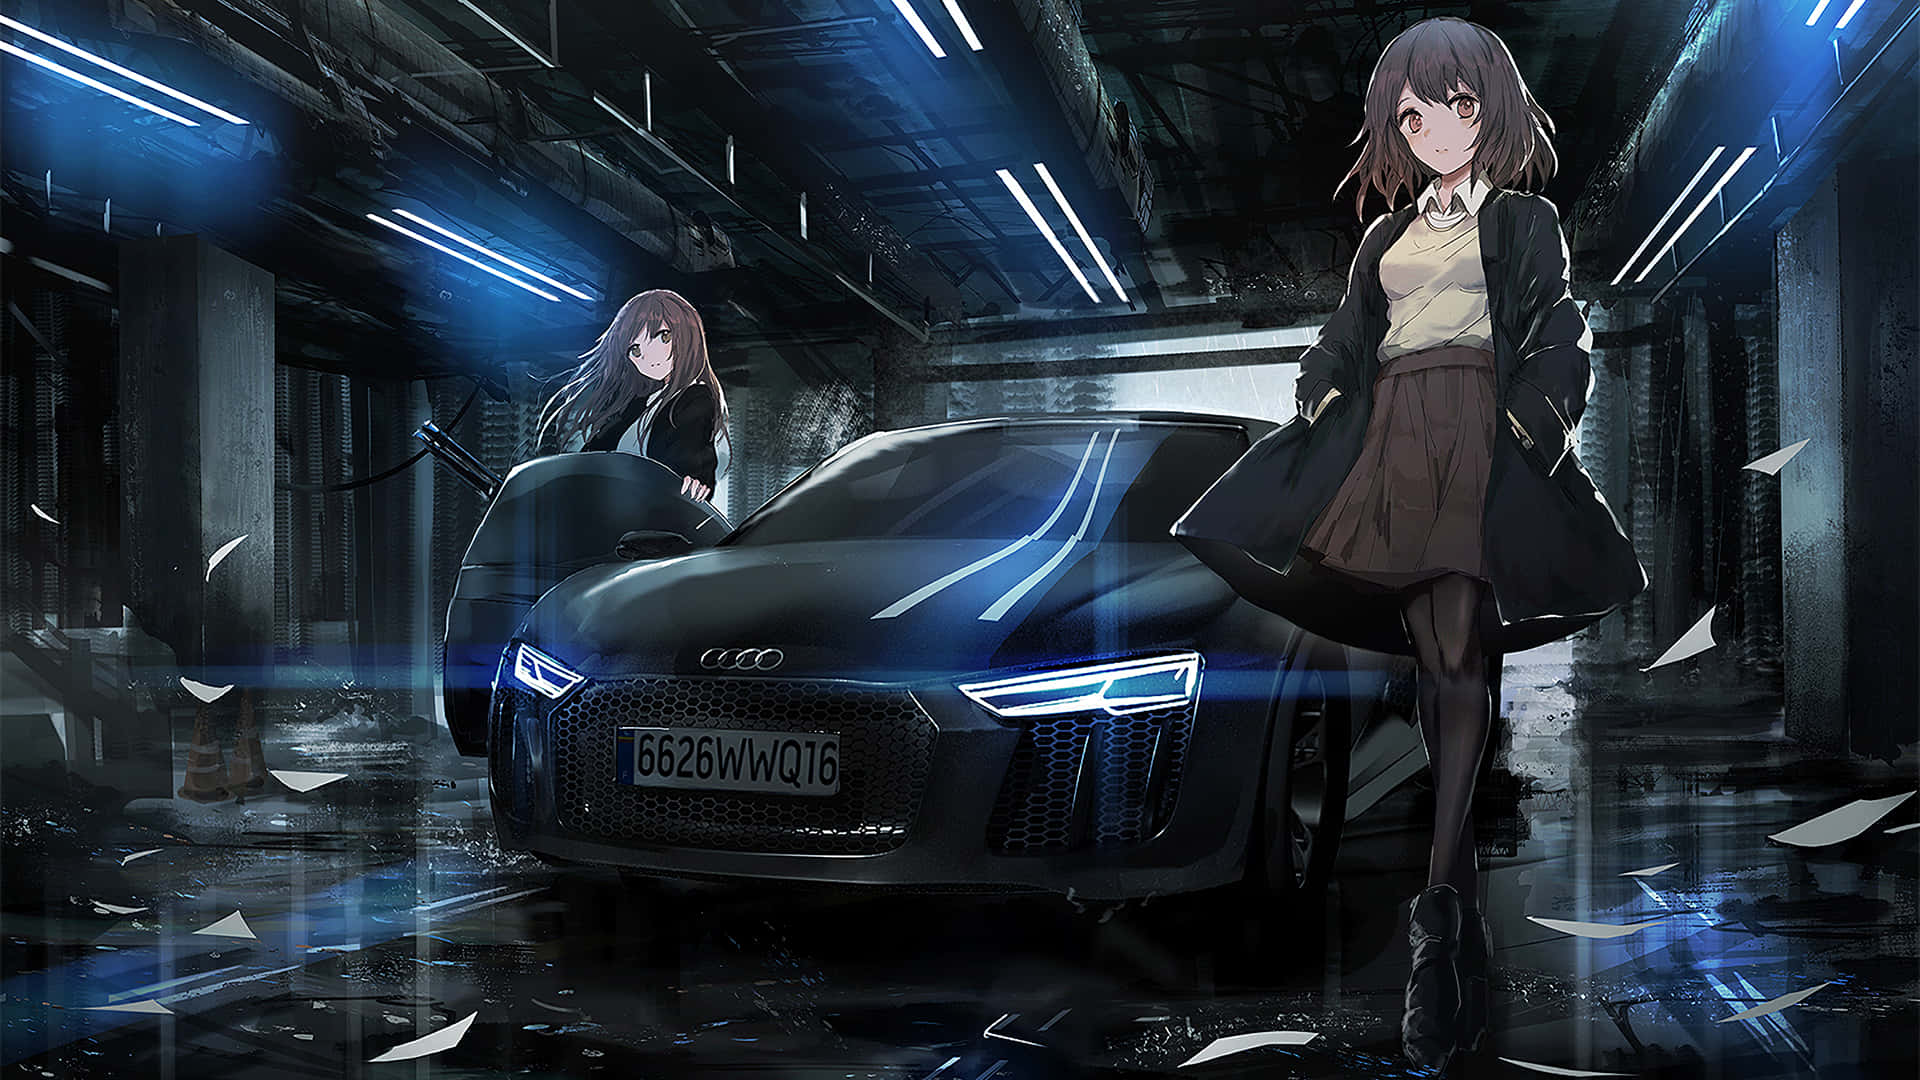 Two Anime Girls Standing Next To A Car